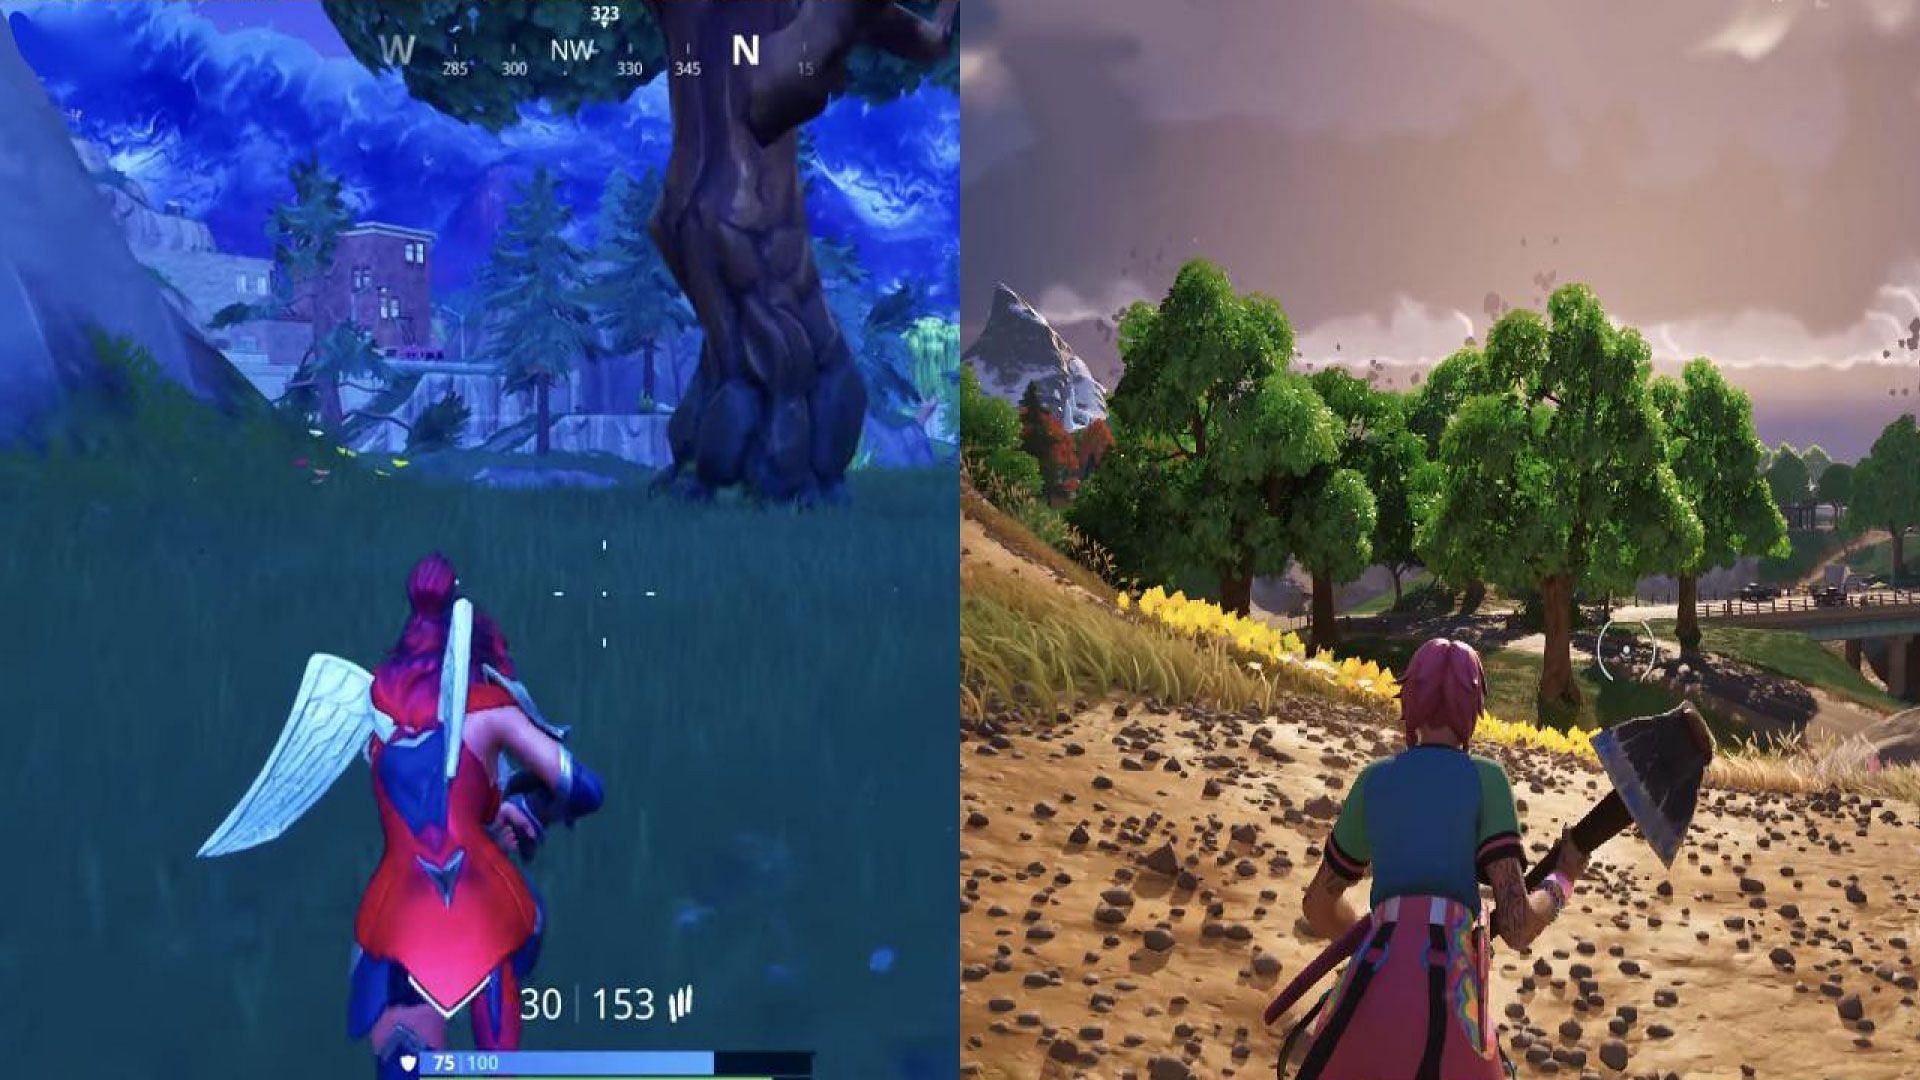 Fortnite player sparks an online debate about graphics (Image via Epic Games/Fortnite)